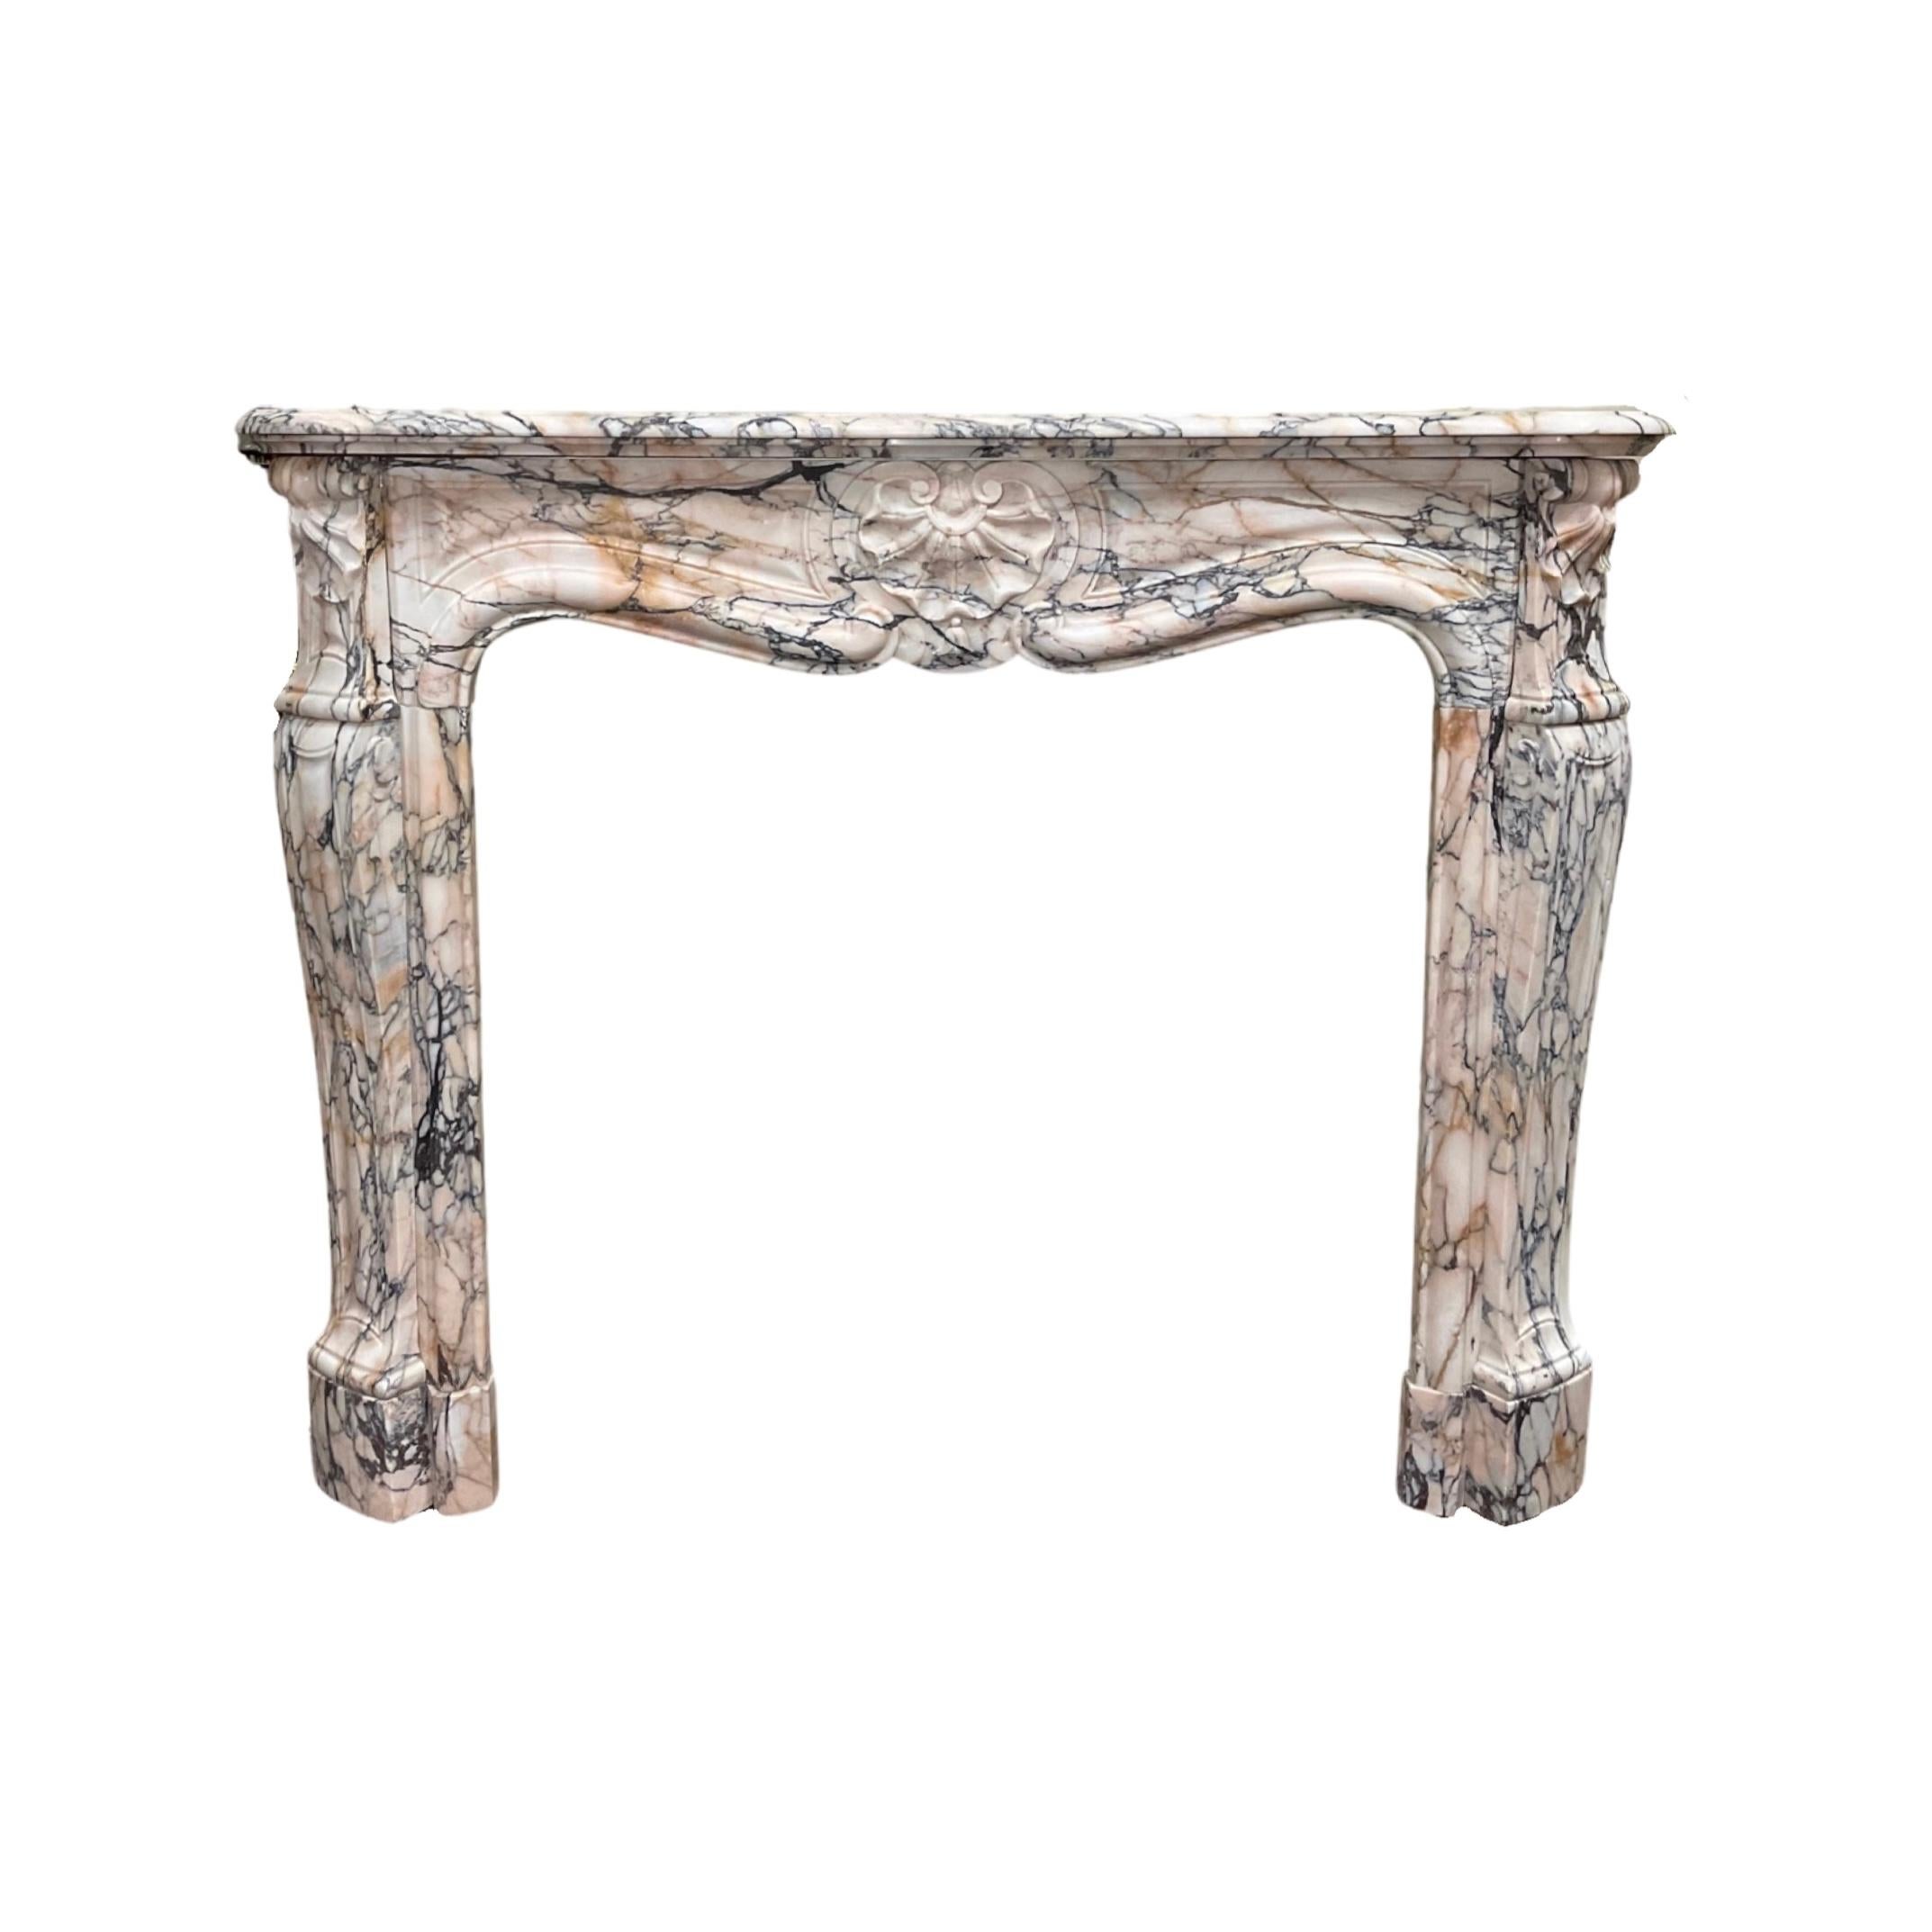 French Louis XVI White Marble Mantel In Good Condition For Sale In Dallas, TX